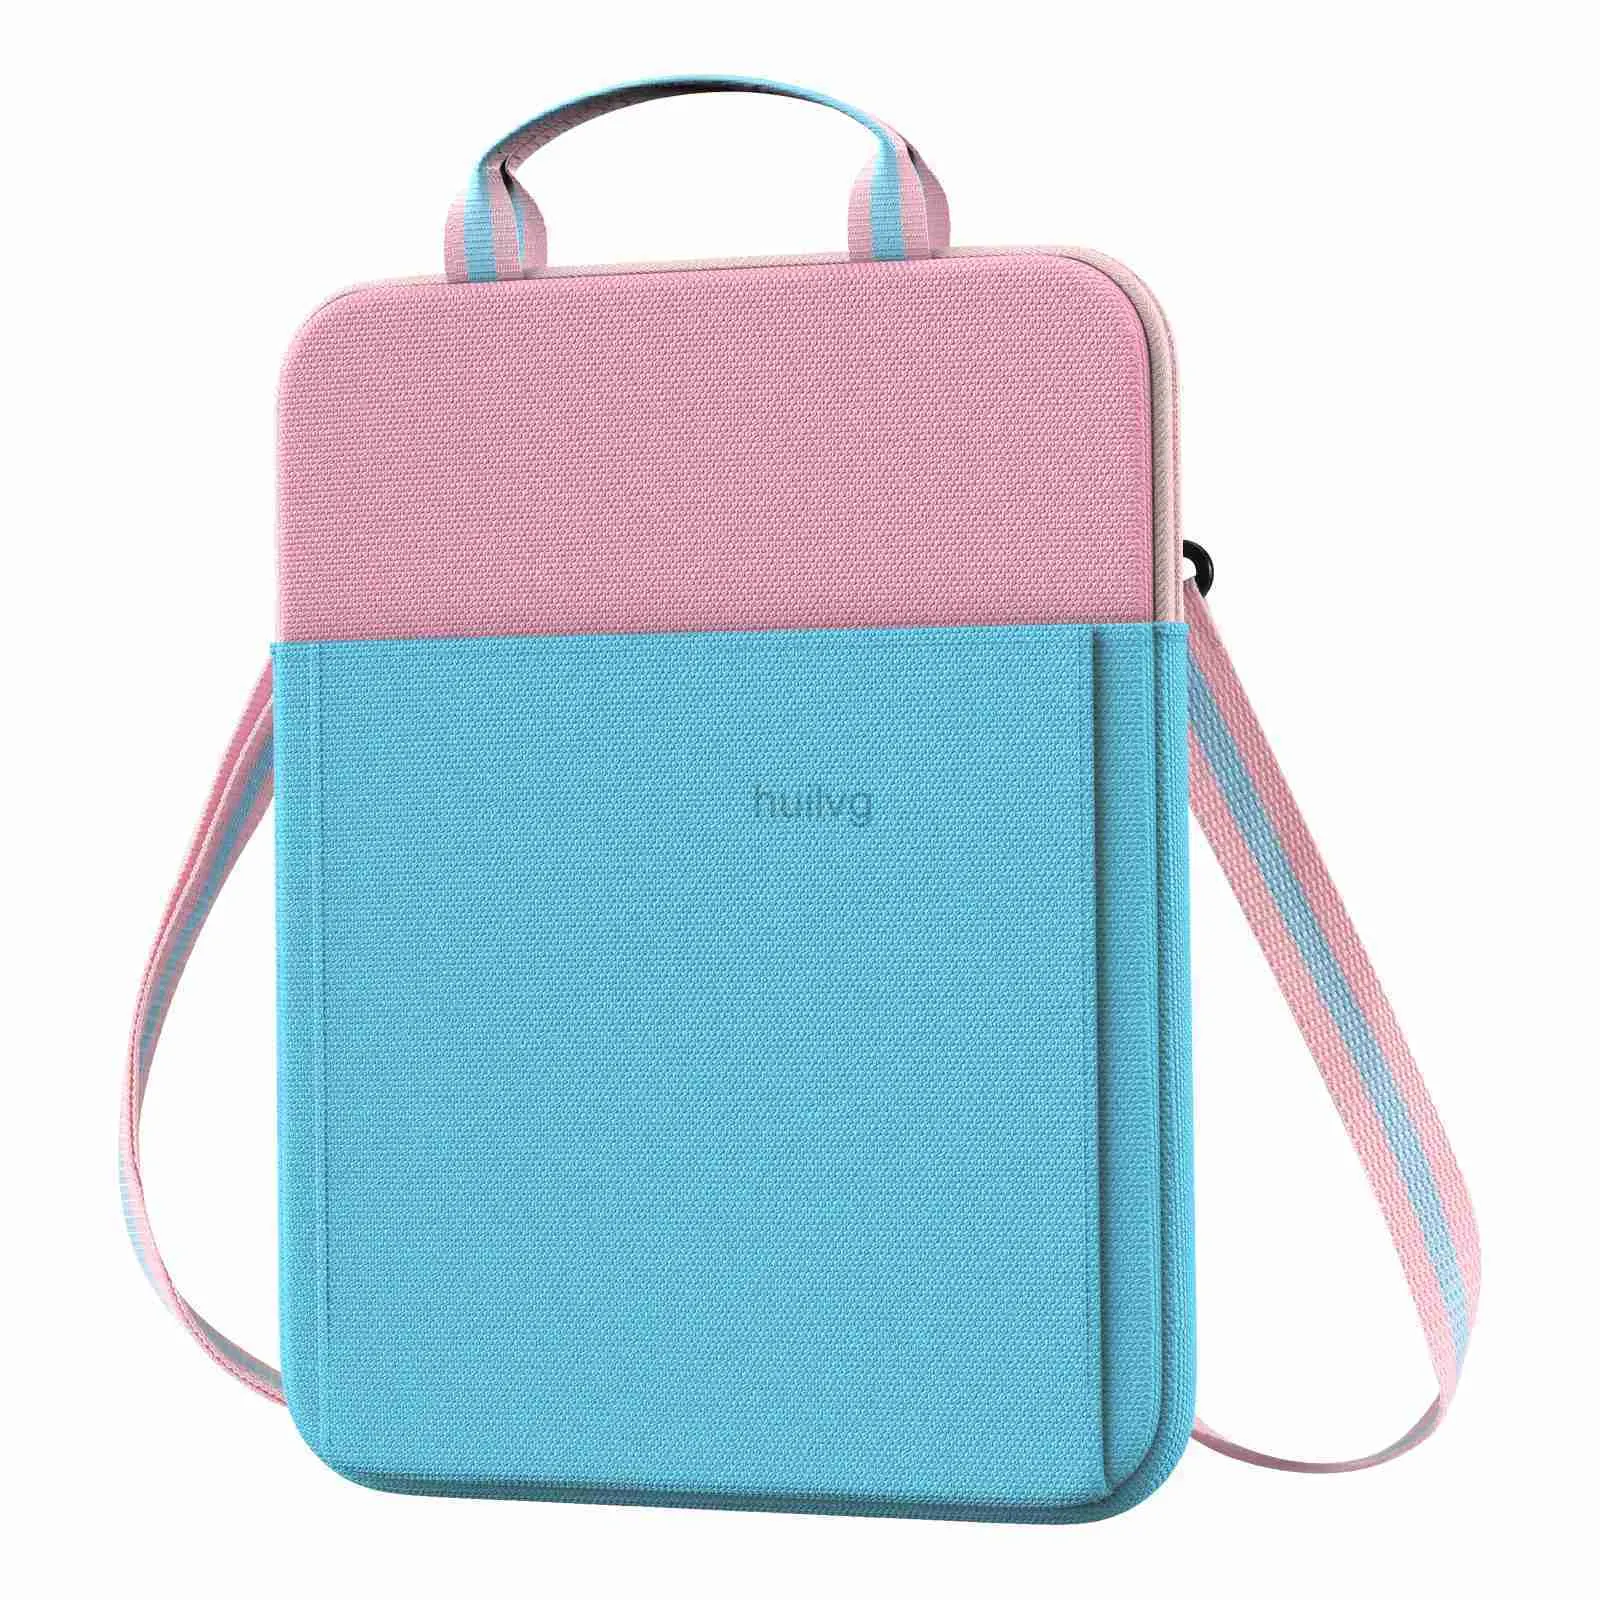 Laptop Cases Backpack Sleeve Case Bag 9 10 11 Inch Cover for MacBook Air 11.6in iPad 10th Generation Pro11 5 4 10.2 Galaxy Tab S6 Lite 24328